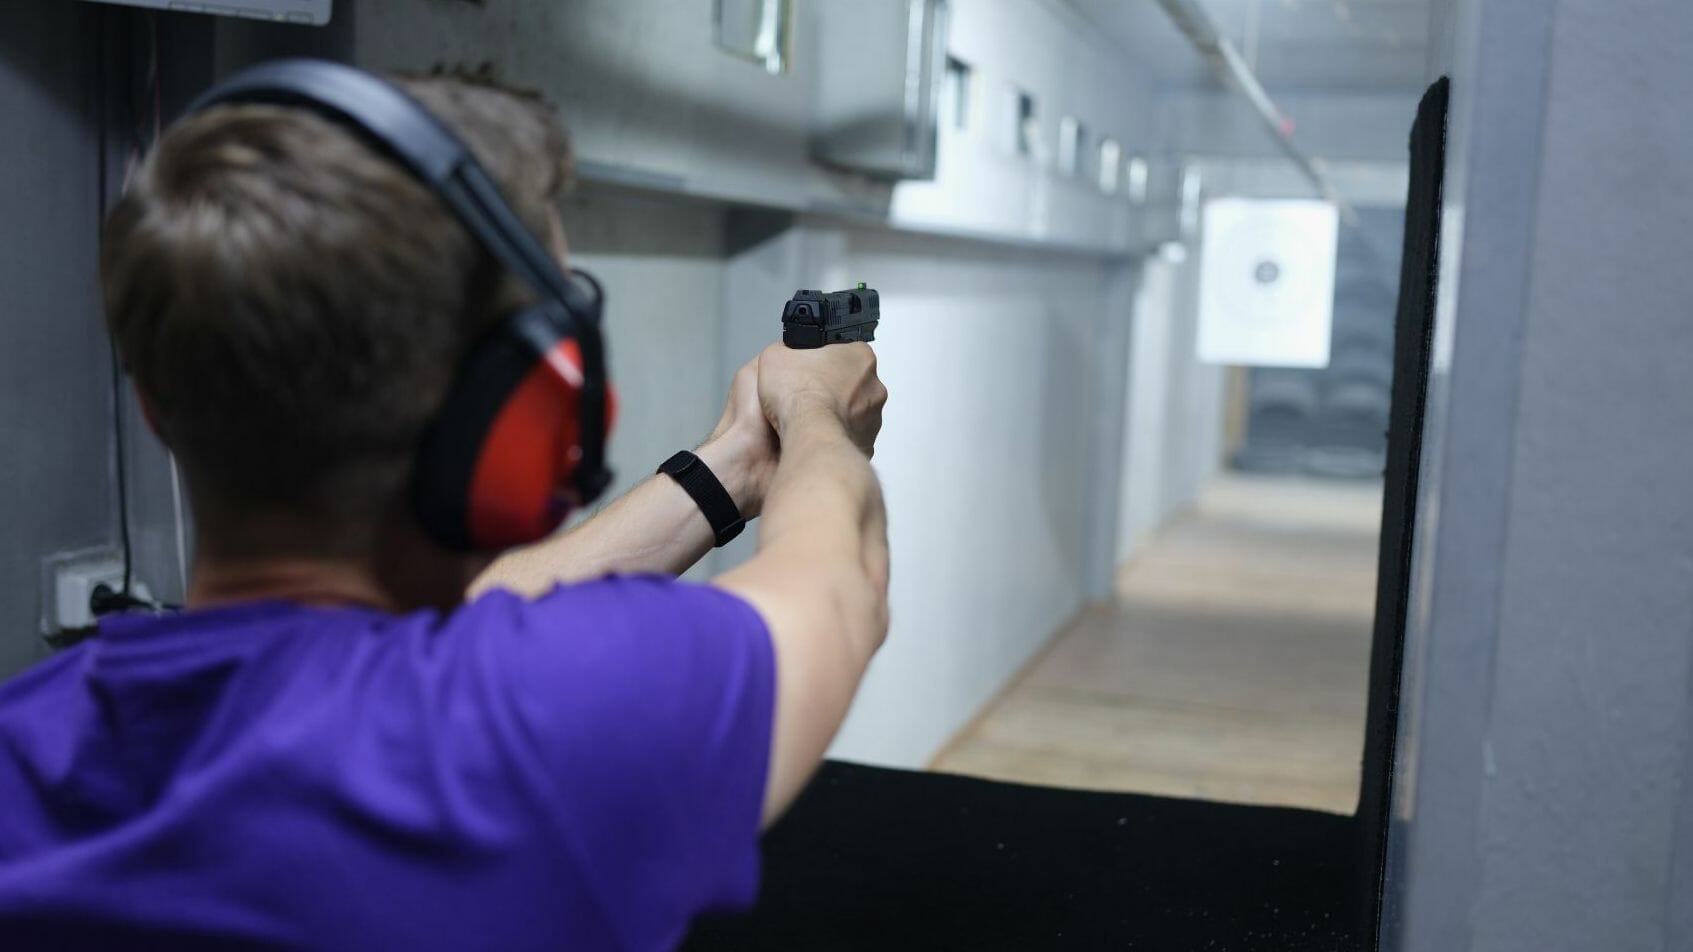 A person aiming at the shooting range